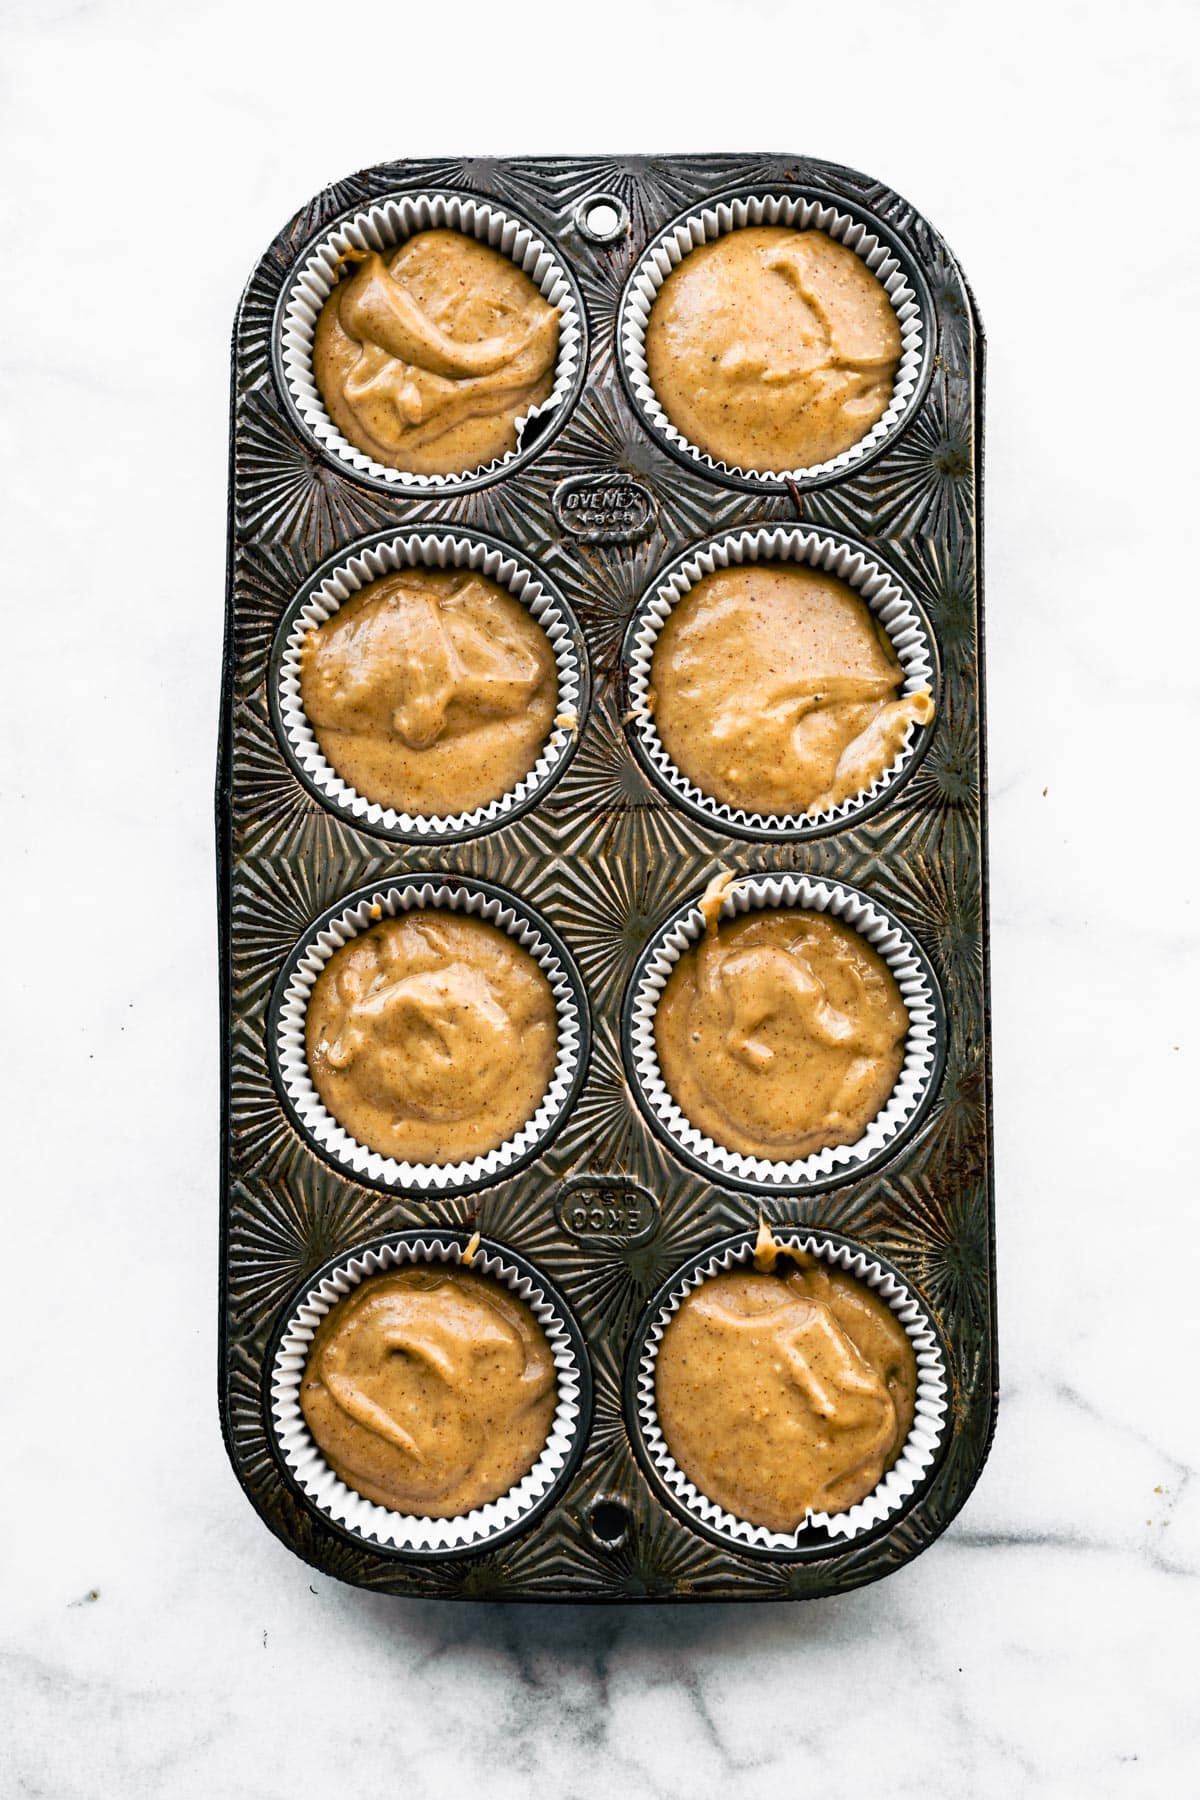 A muffin tin with 8 muffin cups filled with peanut butter banana muffin batter.